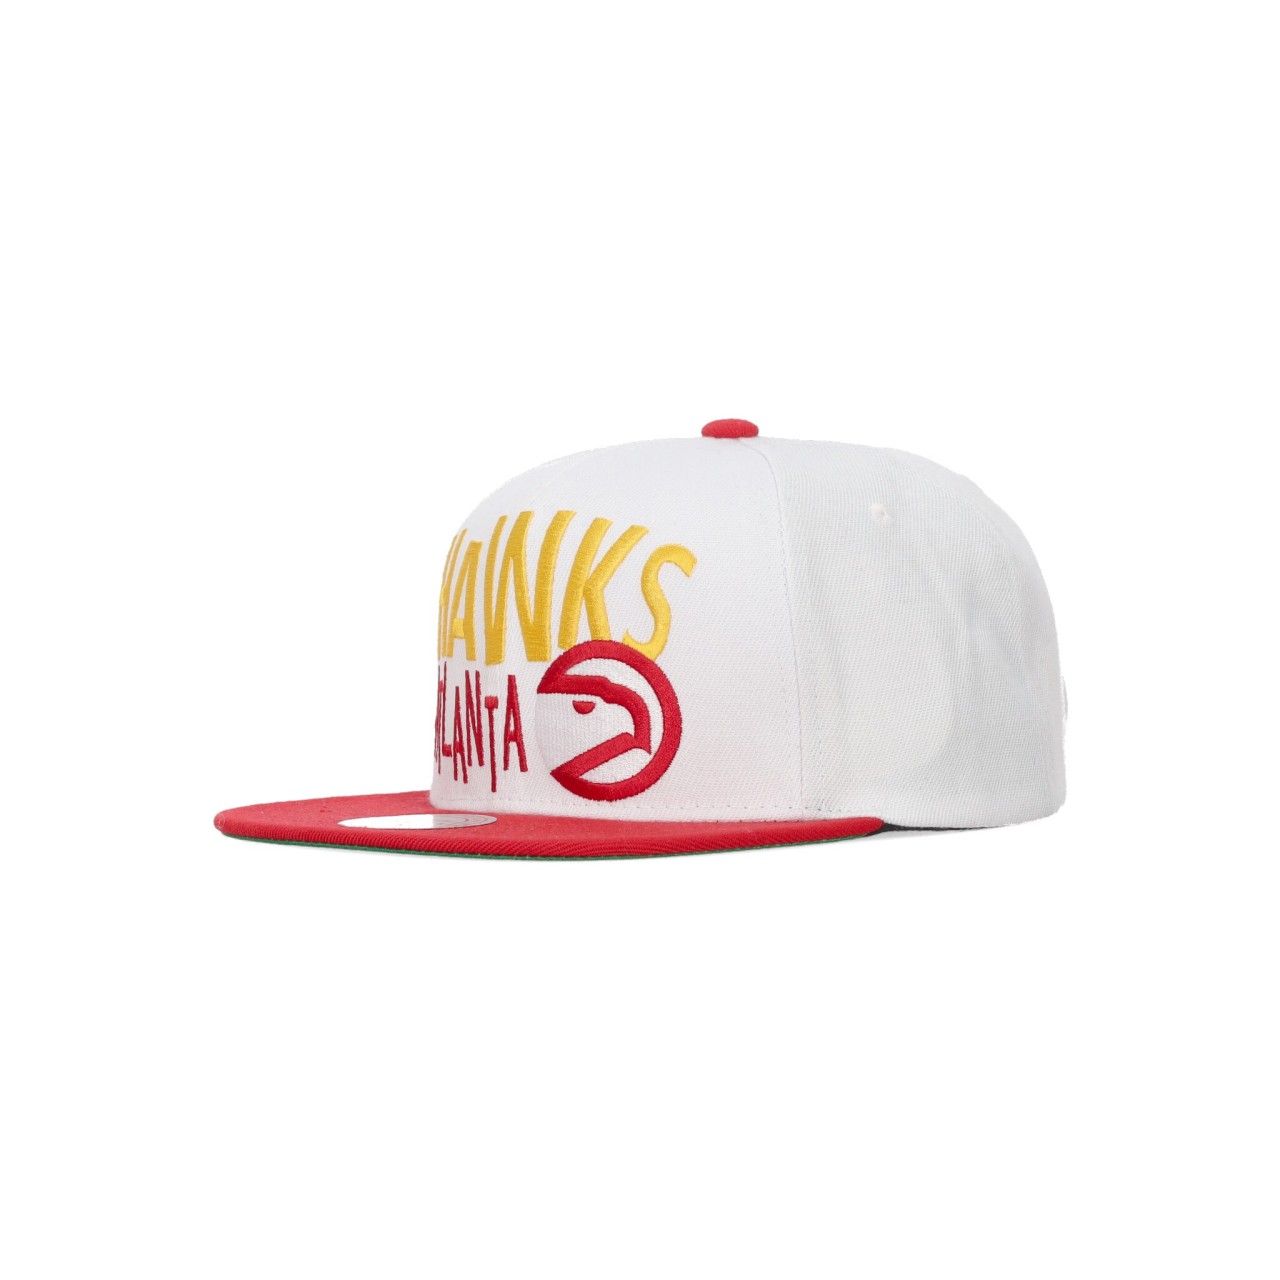 MITCHELL & NESS NBA TOSS UP SNAPBACK ATLHAW HHSS5810-AHAYYPPPWHIT